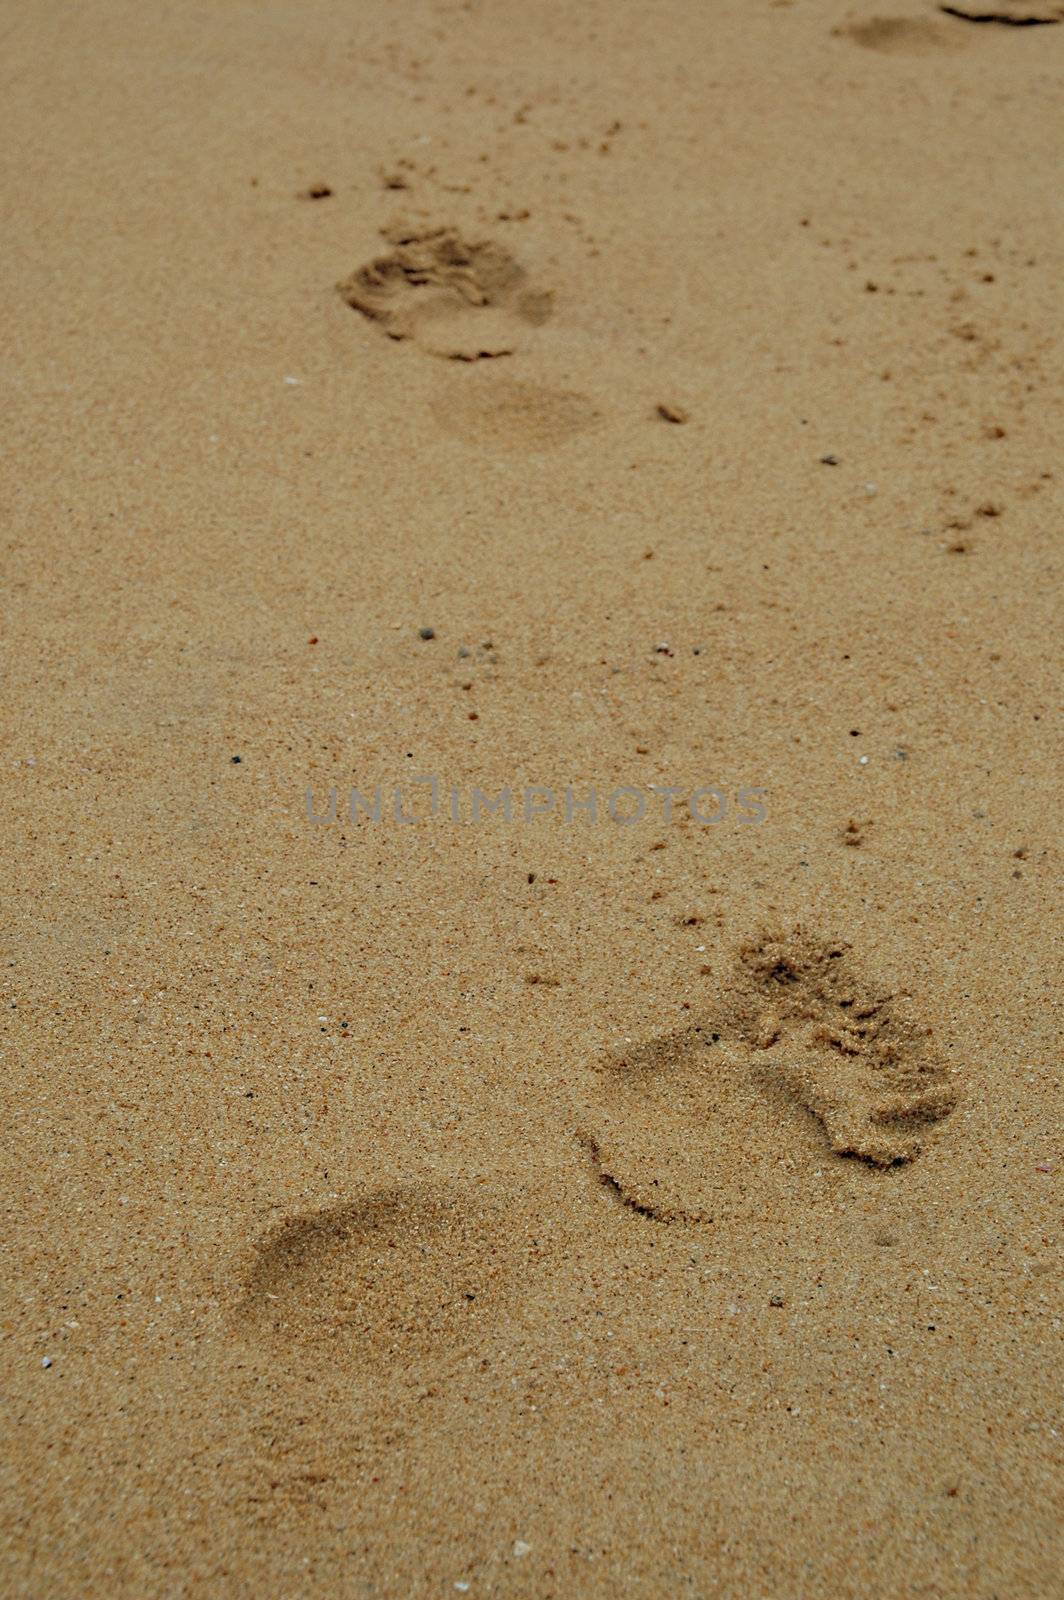 Footprints in the sand by cfoto